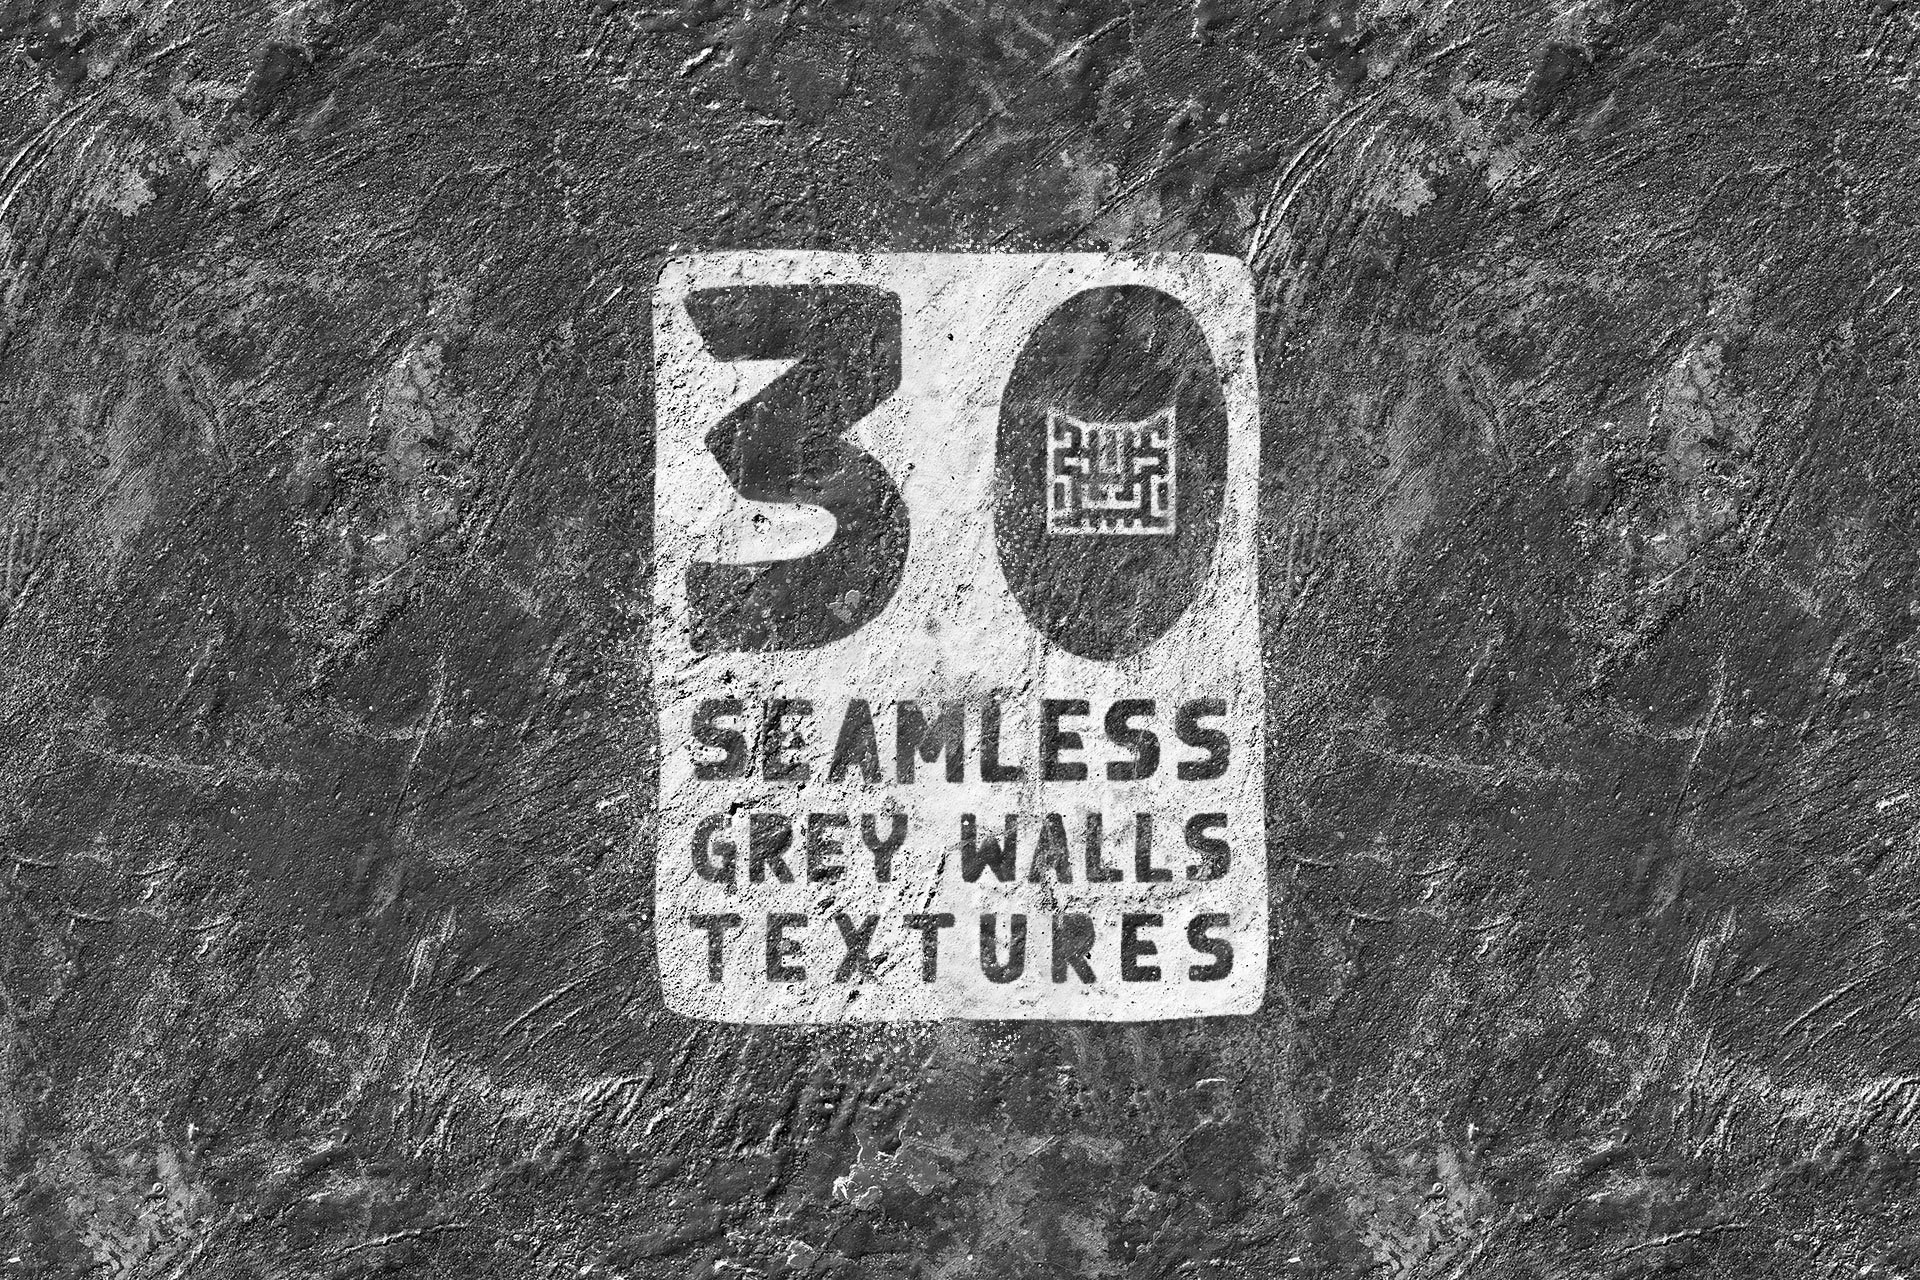 30 Seamless Grey Walls Textures cover image.